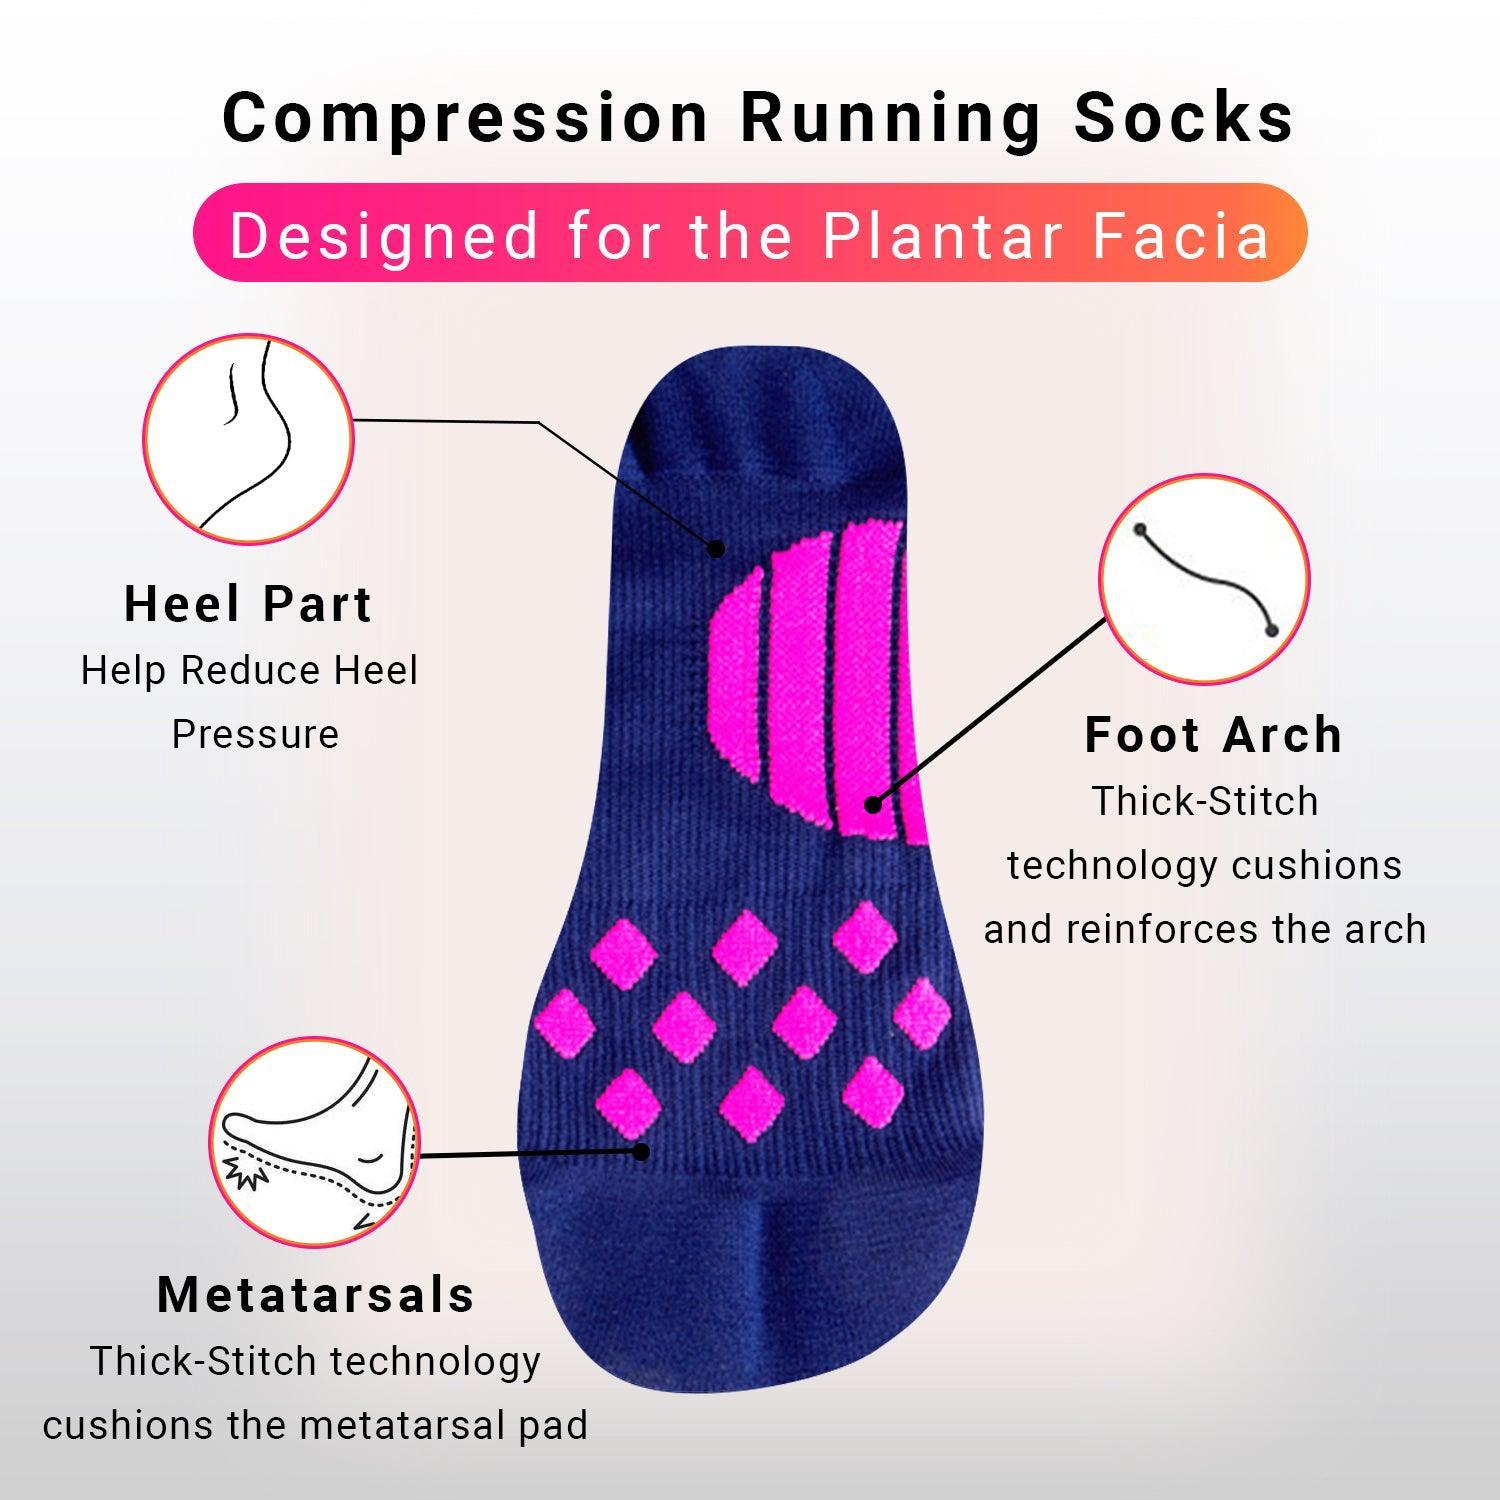 3-Pack Premium Plantar Fasciitis Compressions Socks with Advanced Arch Support (Pack of 3 Pairs) - SPFSMB 3-Pack Premium Plantar Fasciitis Compressions Socks with Advanced Arch Support (Pack of 3 Pairs) - undefined by Supply Physical Therapy Compression socks, Physical Therapy